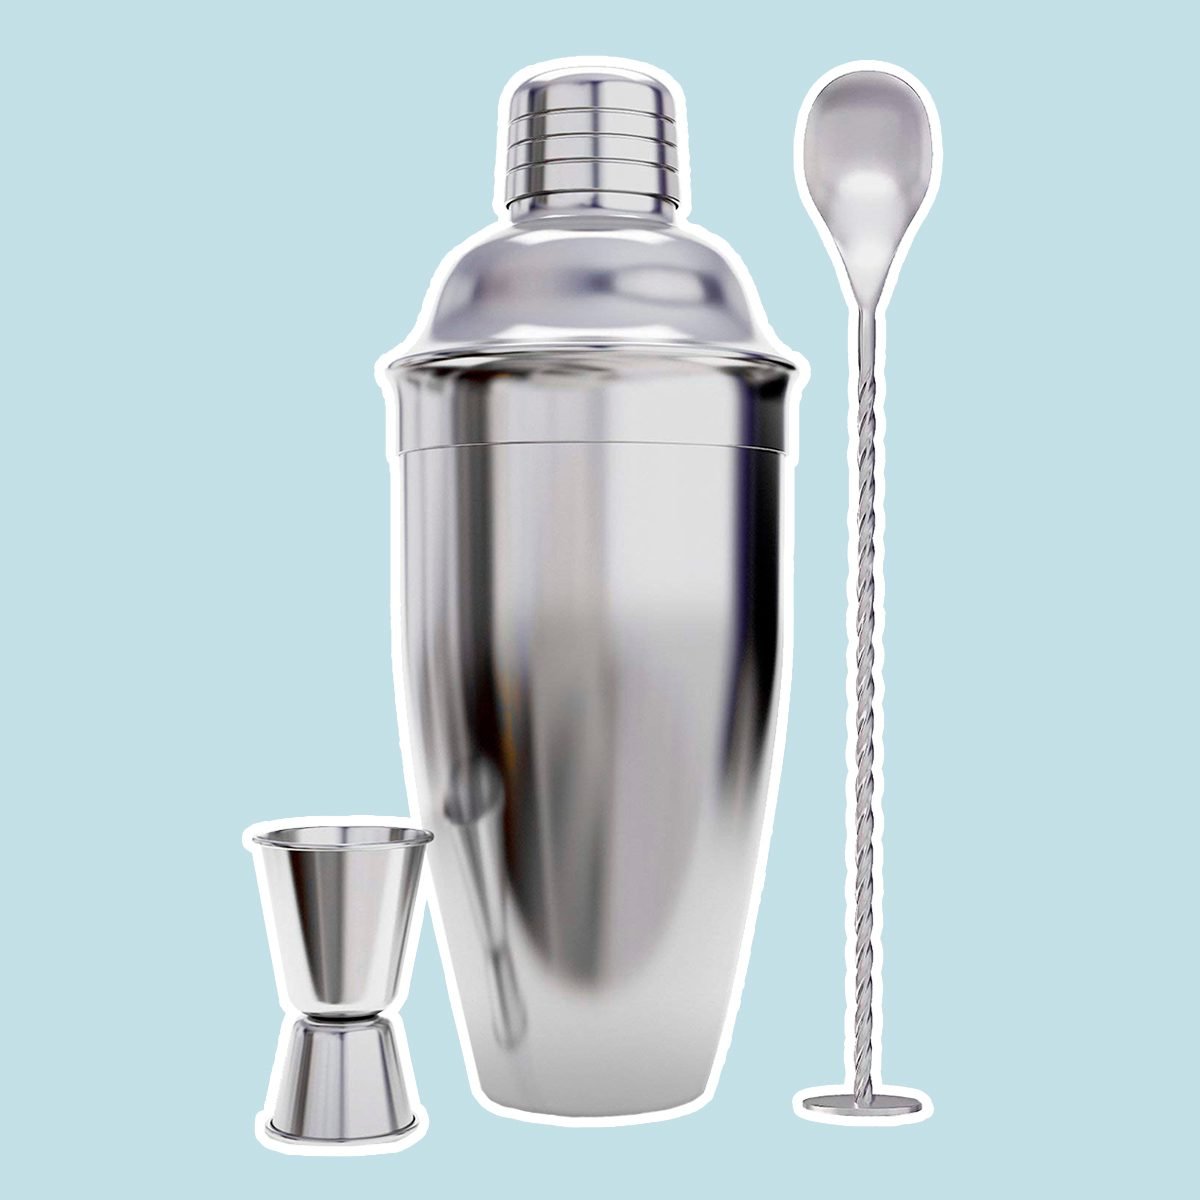 Cresimo 24 Ounce Cocktail Shaker Plus Drink Recipes Booklet - Professional Stainless Steel Bar Tools - Built-in Bartender Strainer